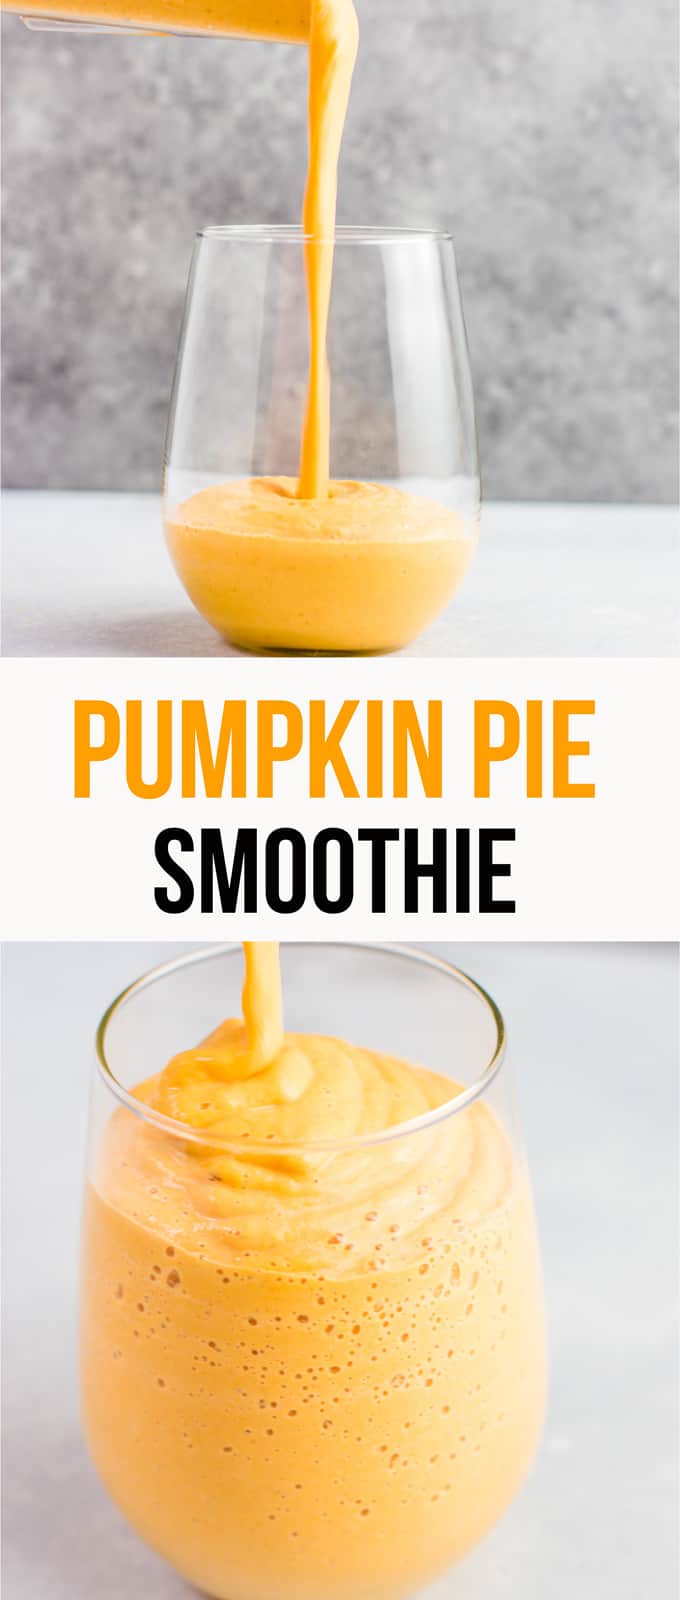 image with text "pumpkin pie smoothie"